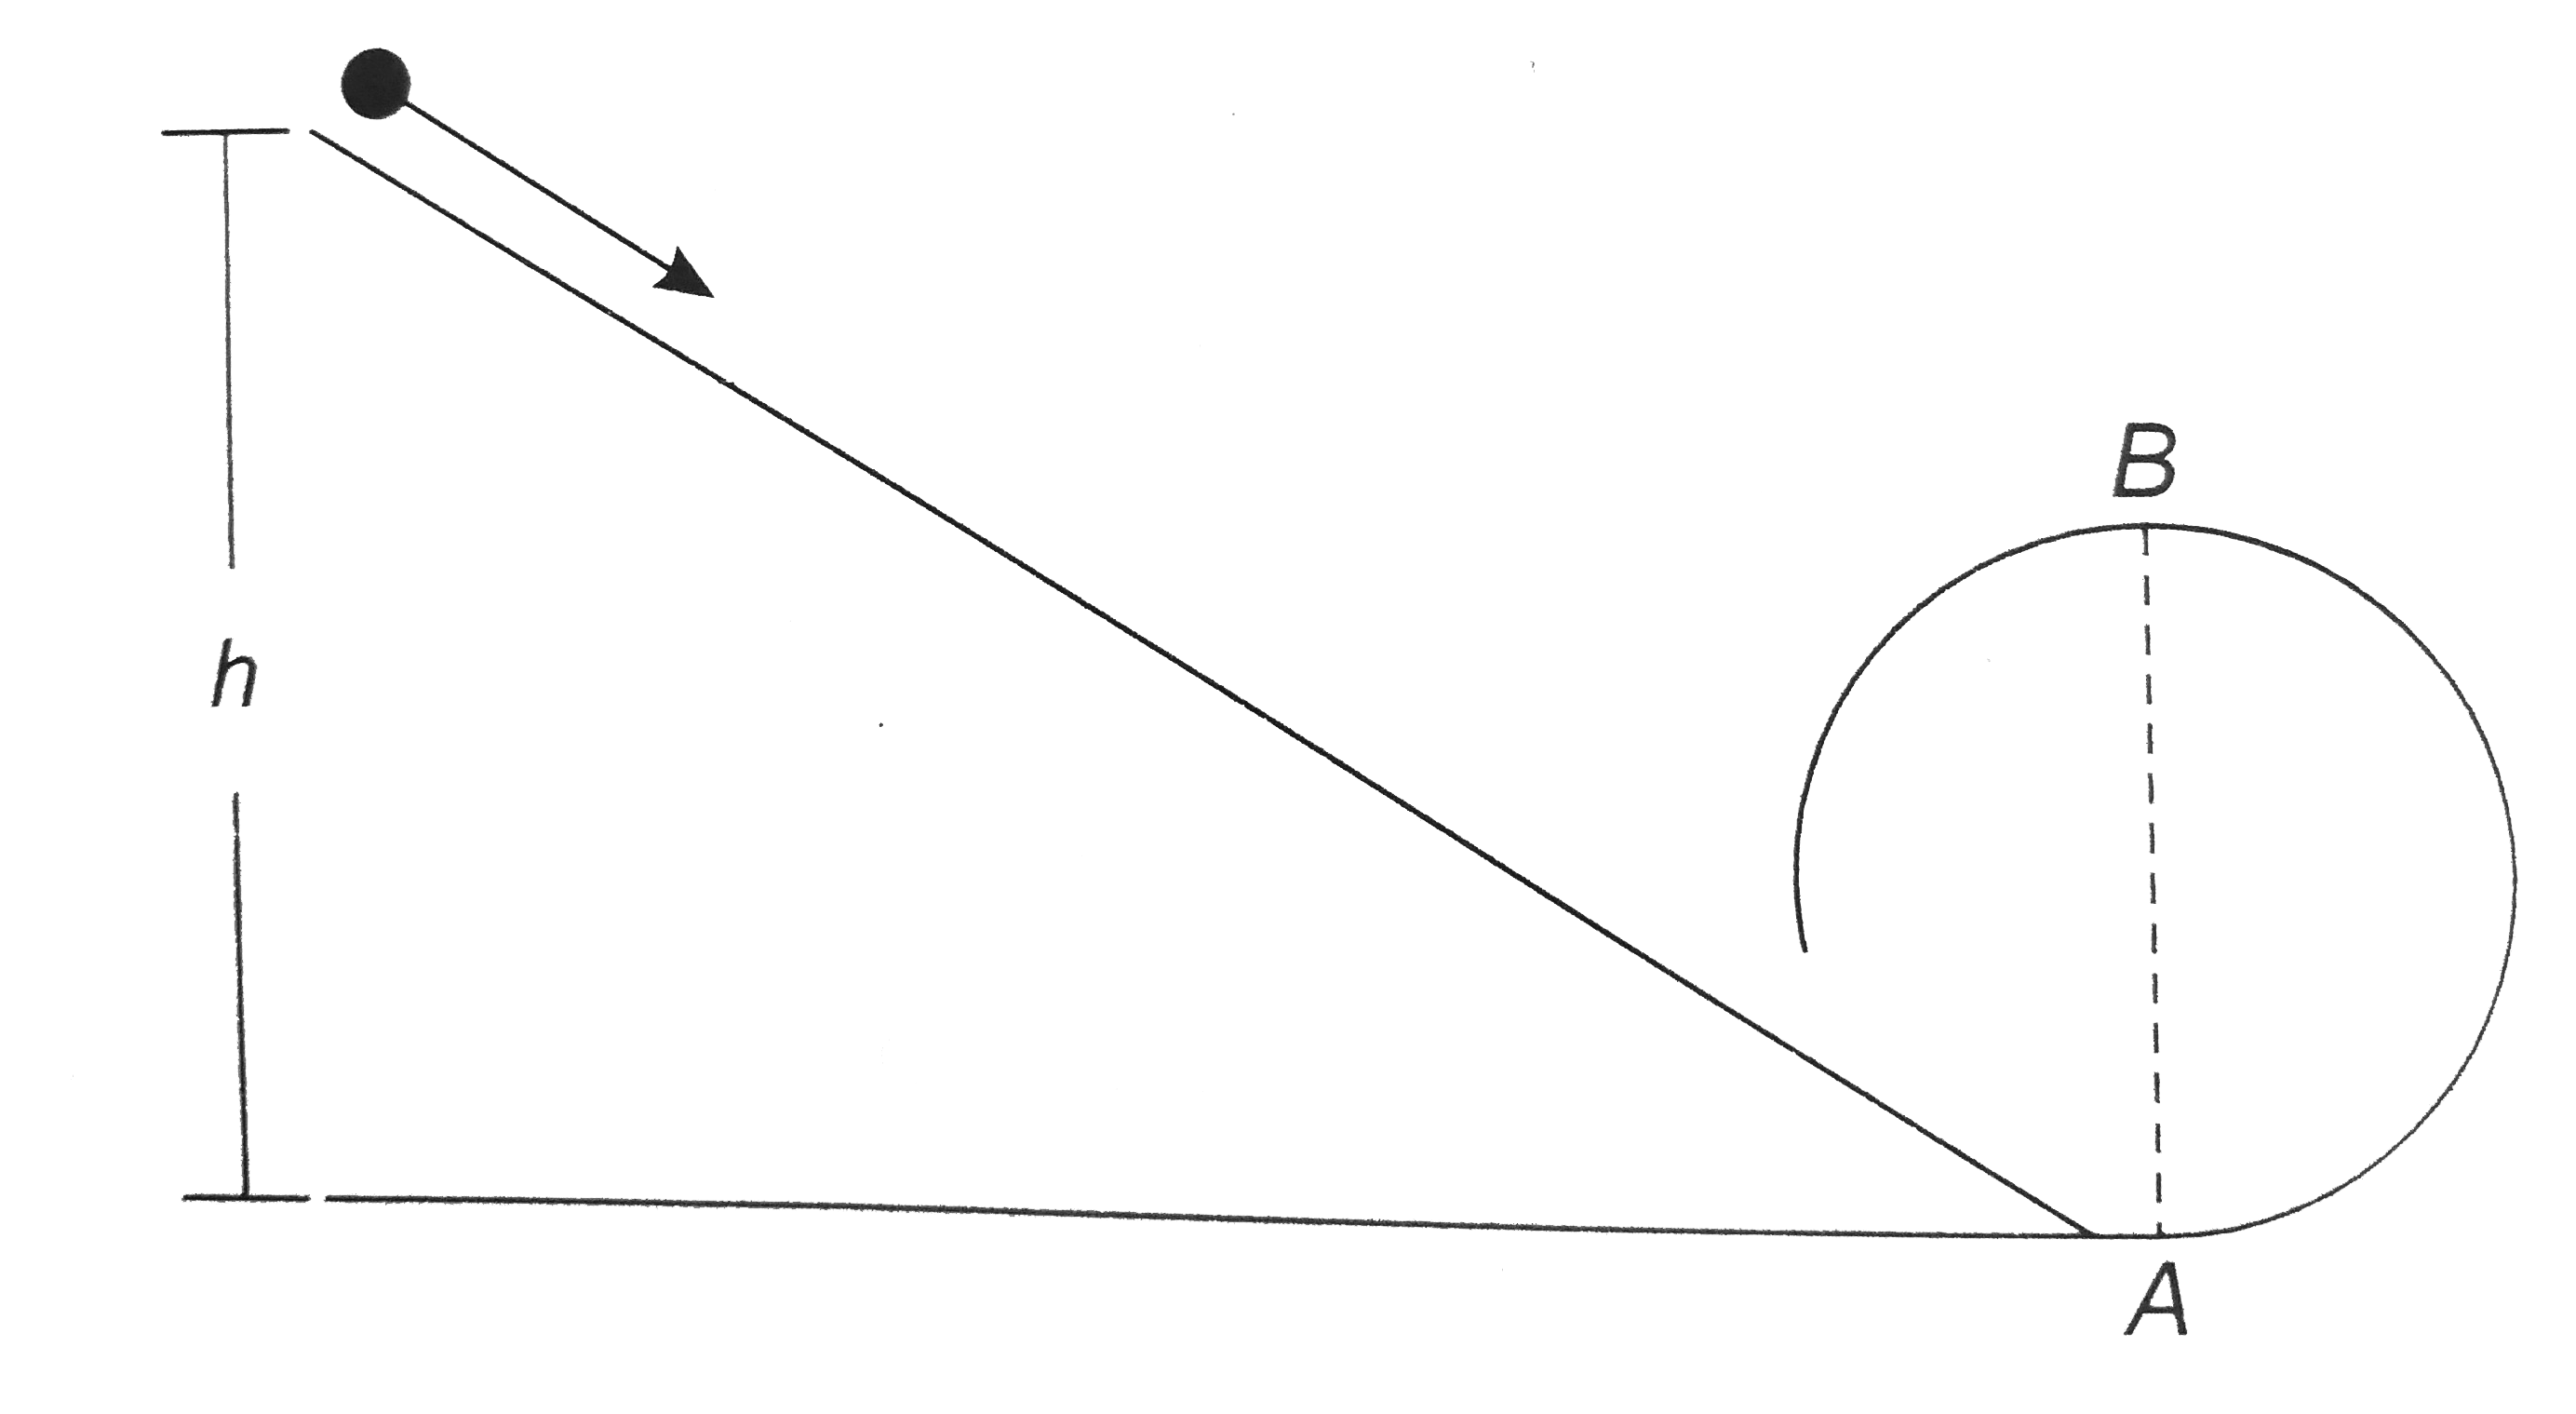 A body initially rest and sliding along a frictionless trick from a height h (as shown in the figure) just completes a vertical circle of diameter AB = D. The height h is equal to